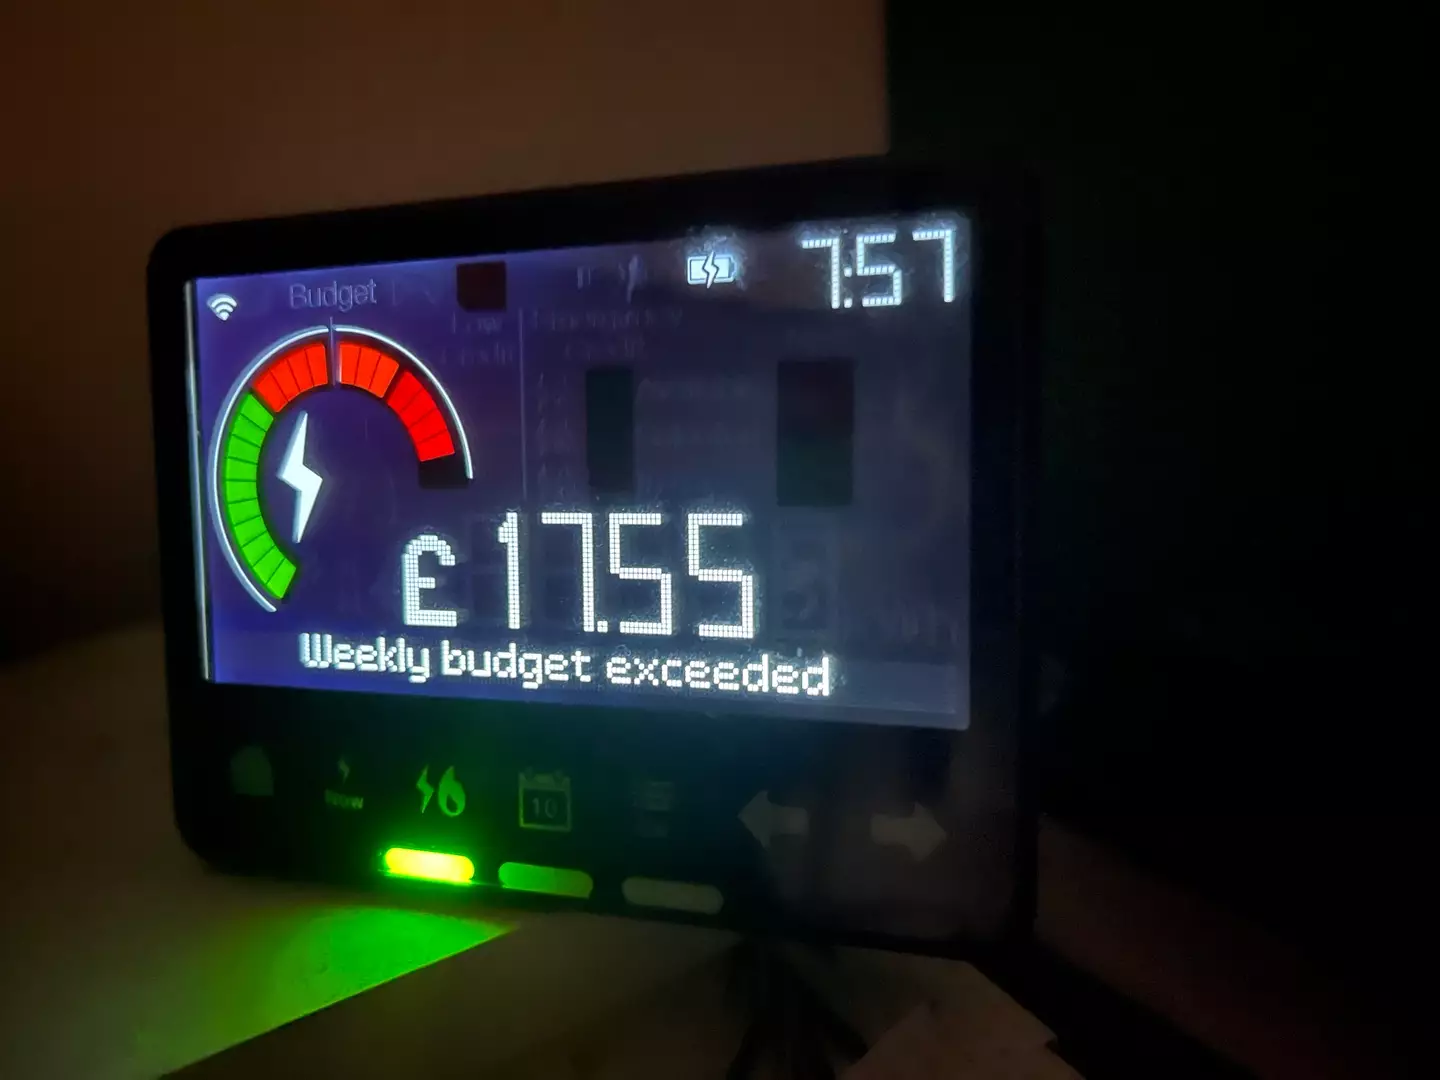 Should you get a smart meter, or would it cost you more?